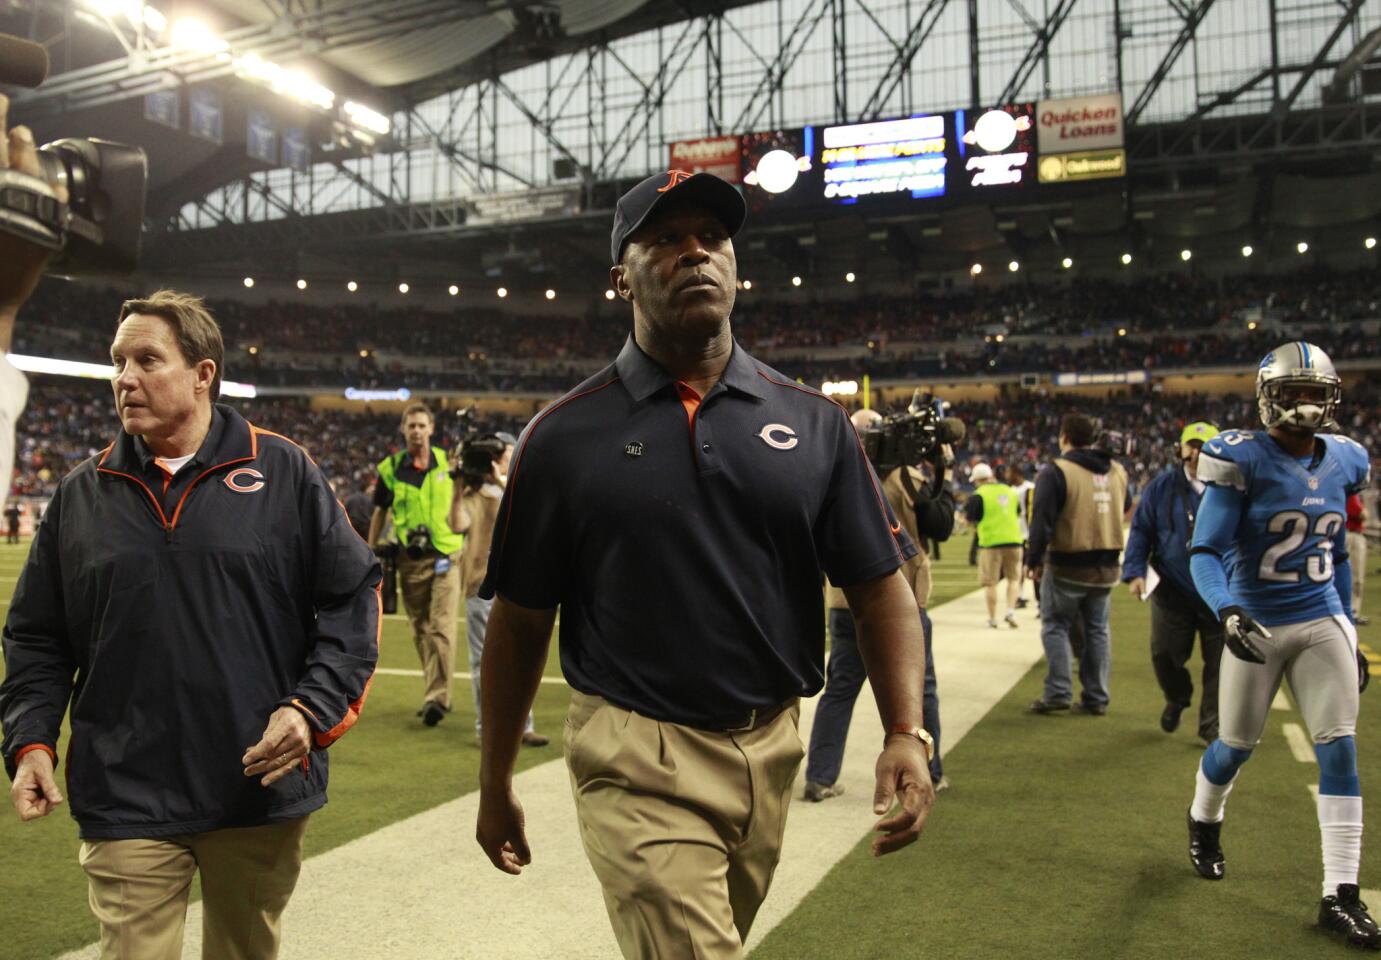 Lovie Smith walks off the field after the Bears beat the Lions in the 2012 season finale.